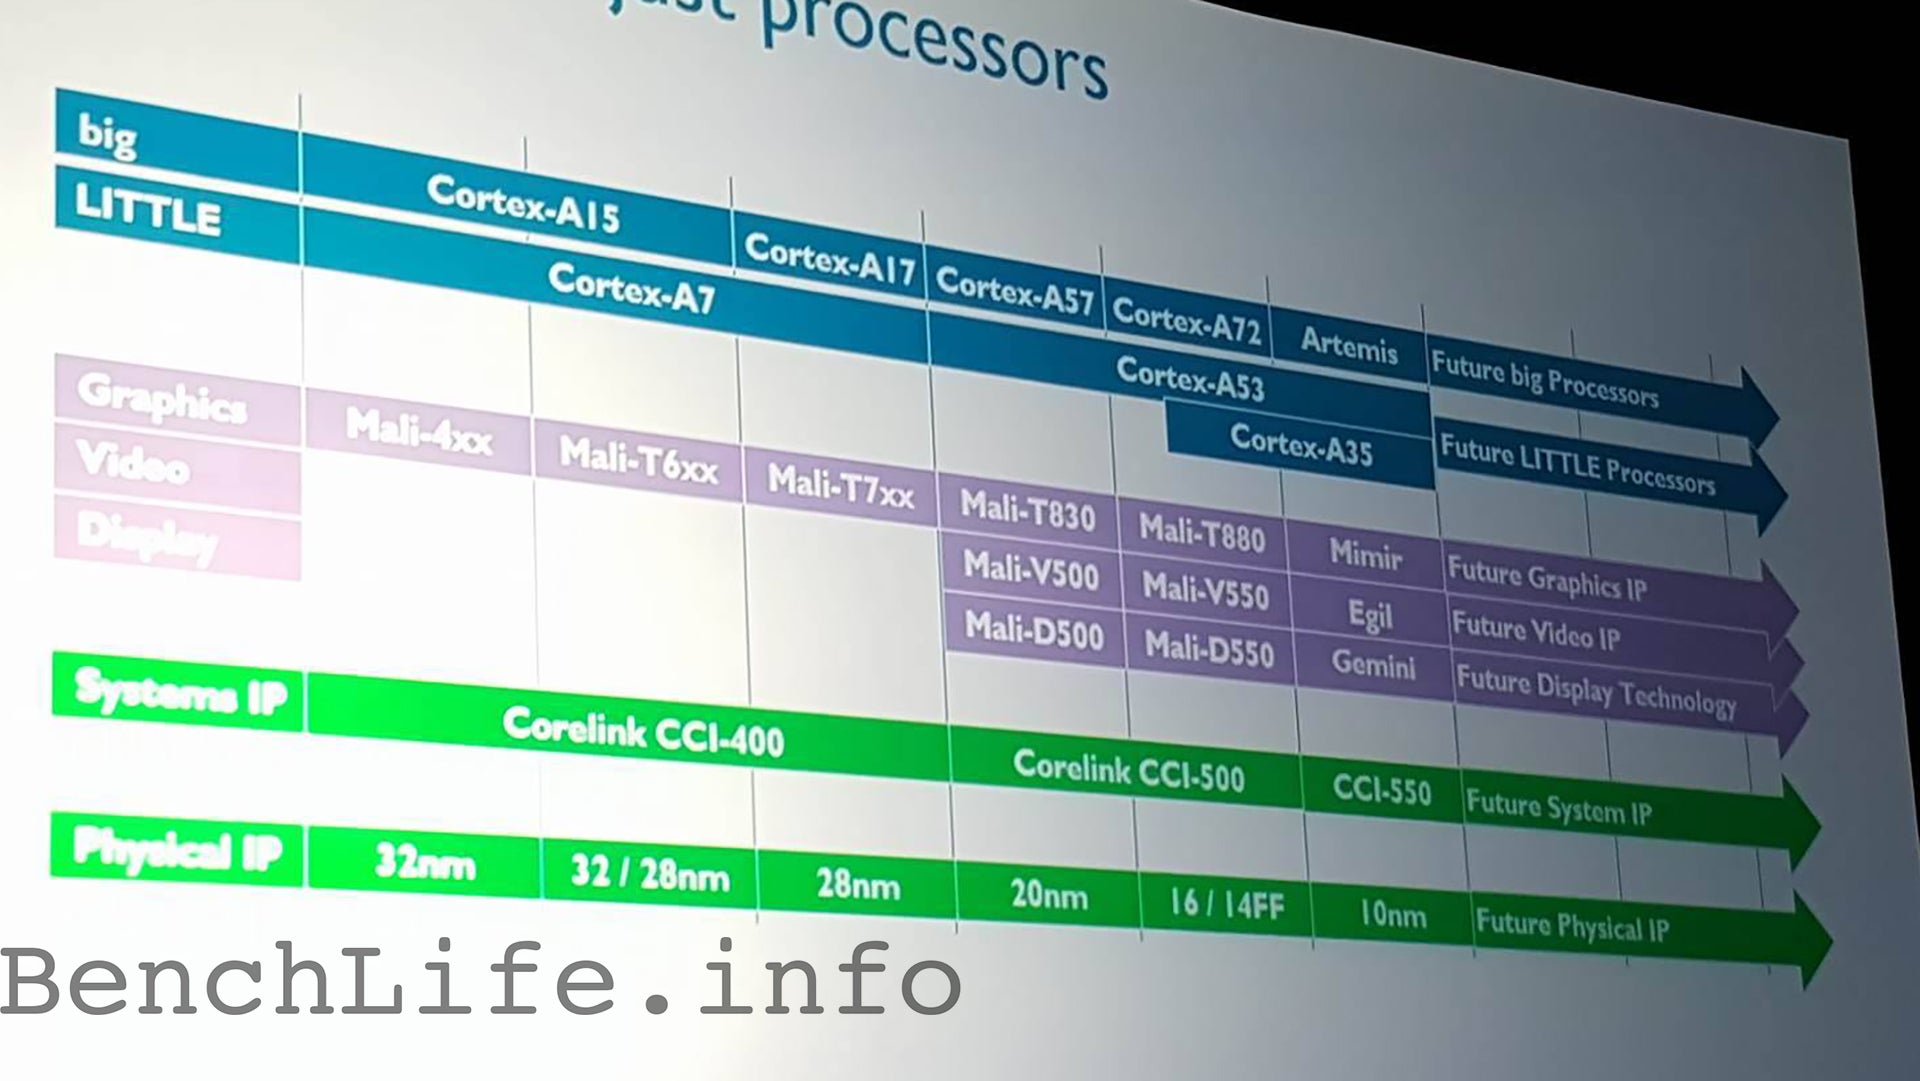 ARM's roadmap includes powerful Artemis cores, built on the upcoming 10nm process - ARM's future chipset roadmap leaks, powerful 10nm Artemis cores in tow